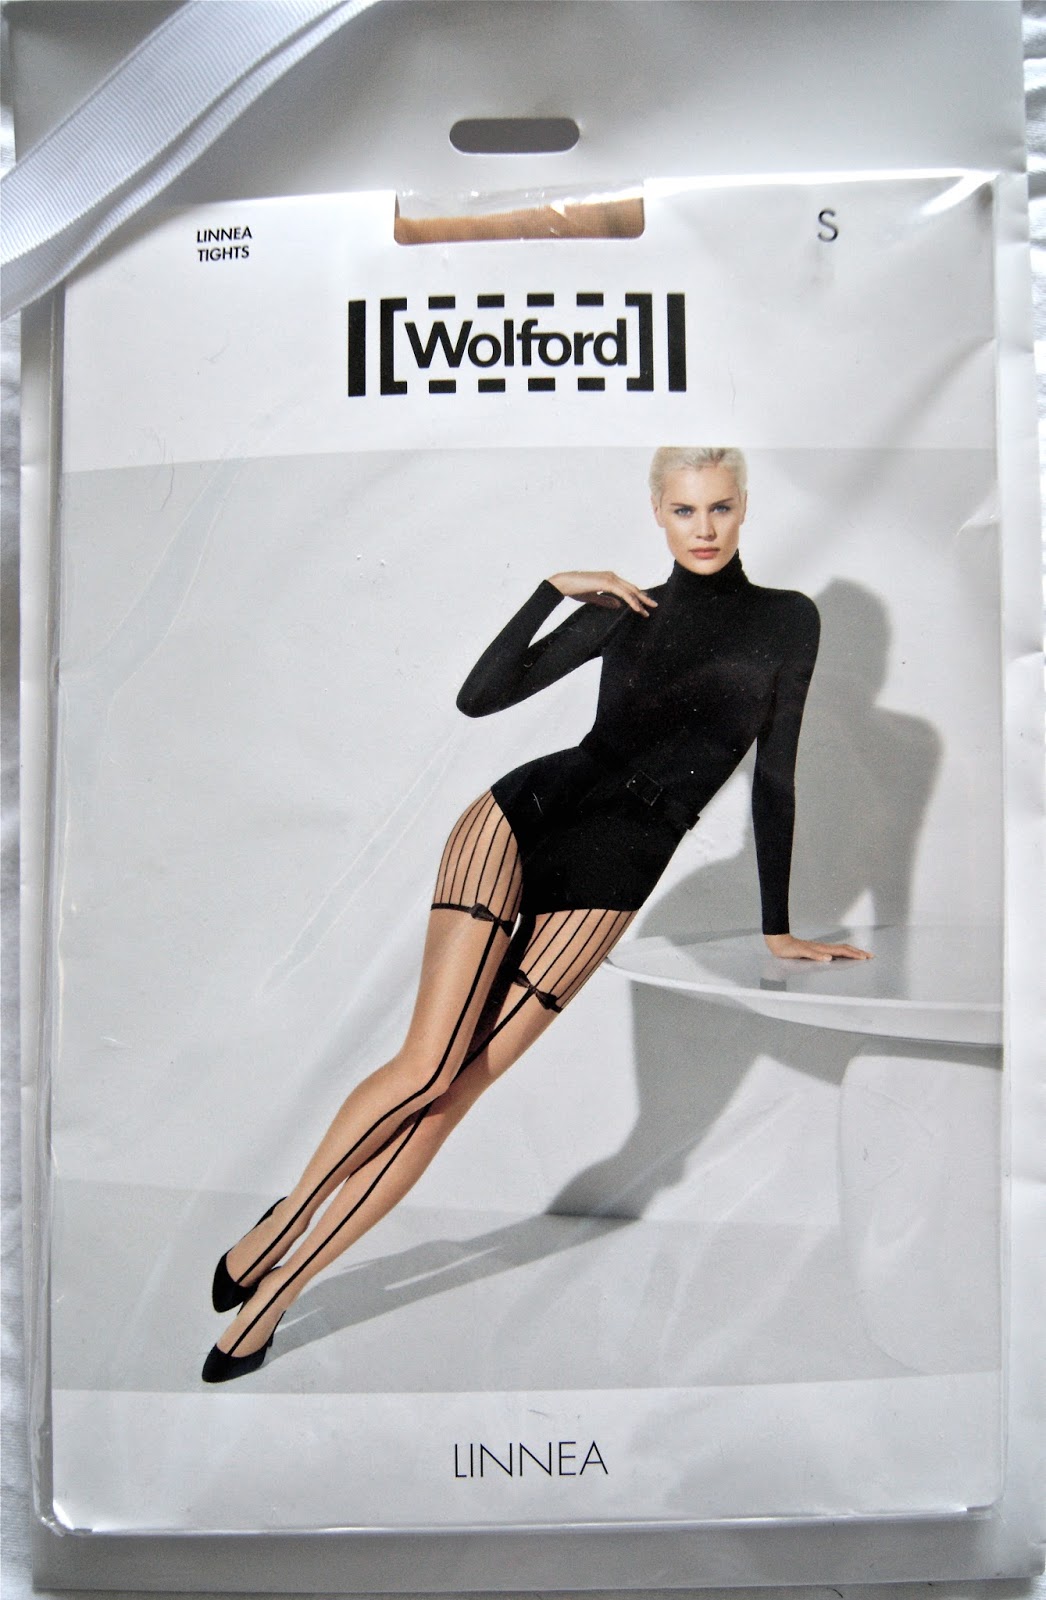 Tights and Ladders: Wolford Linnea Tights Review - Sahara/Black